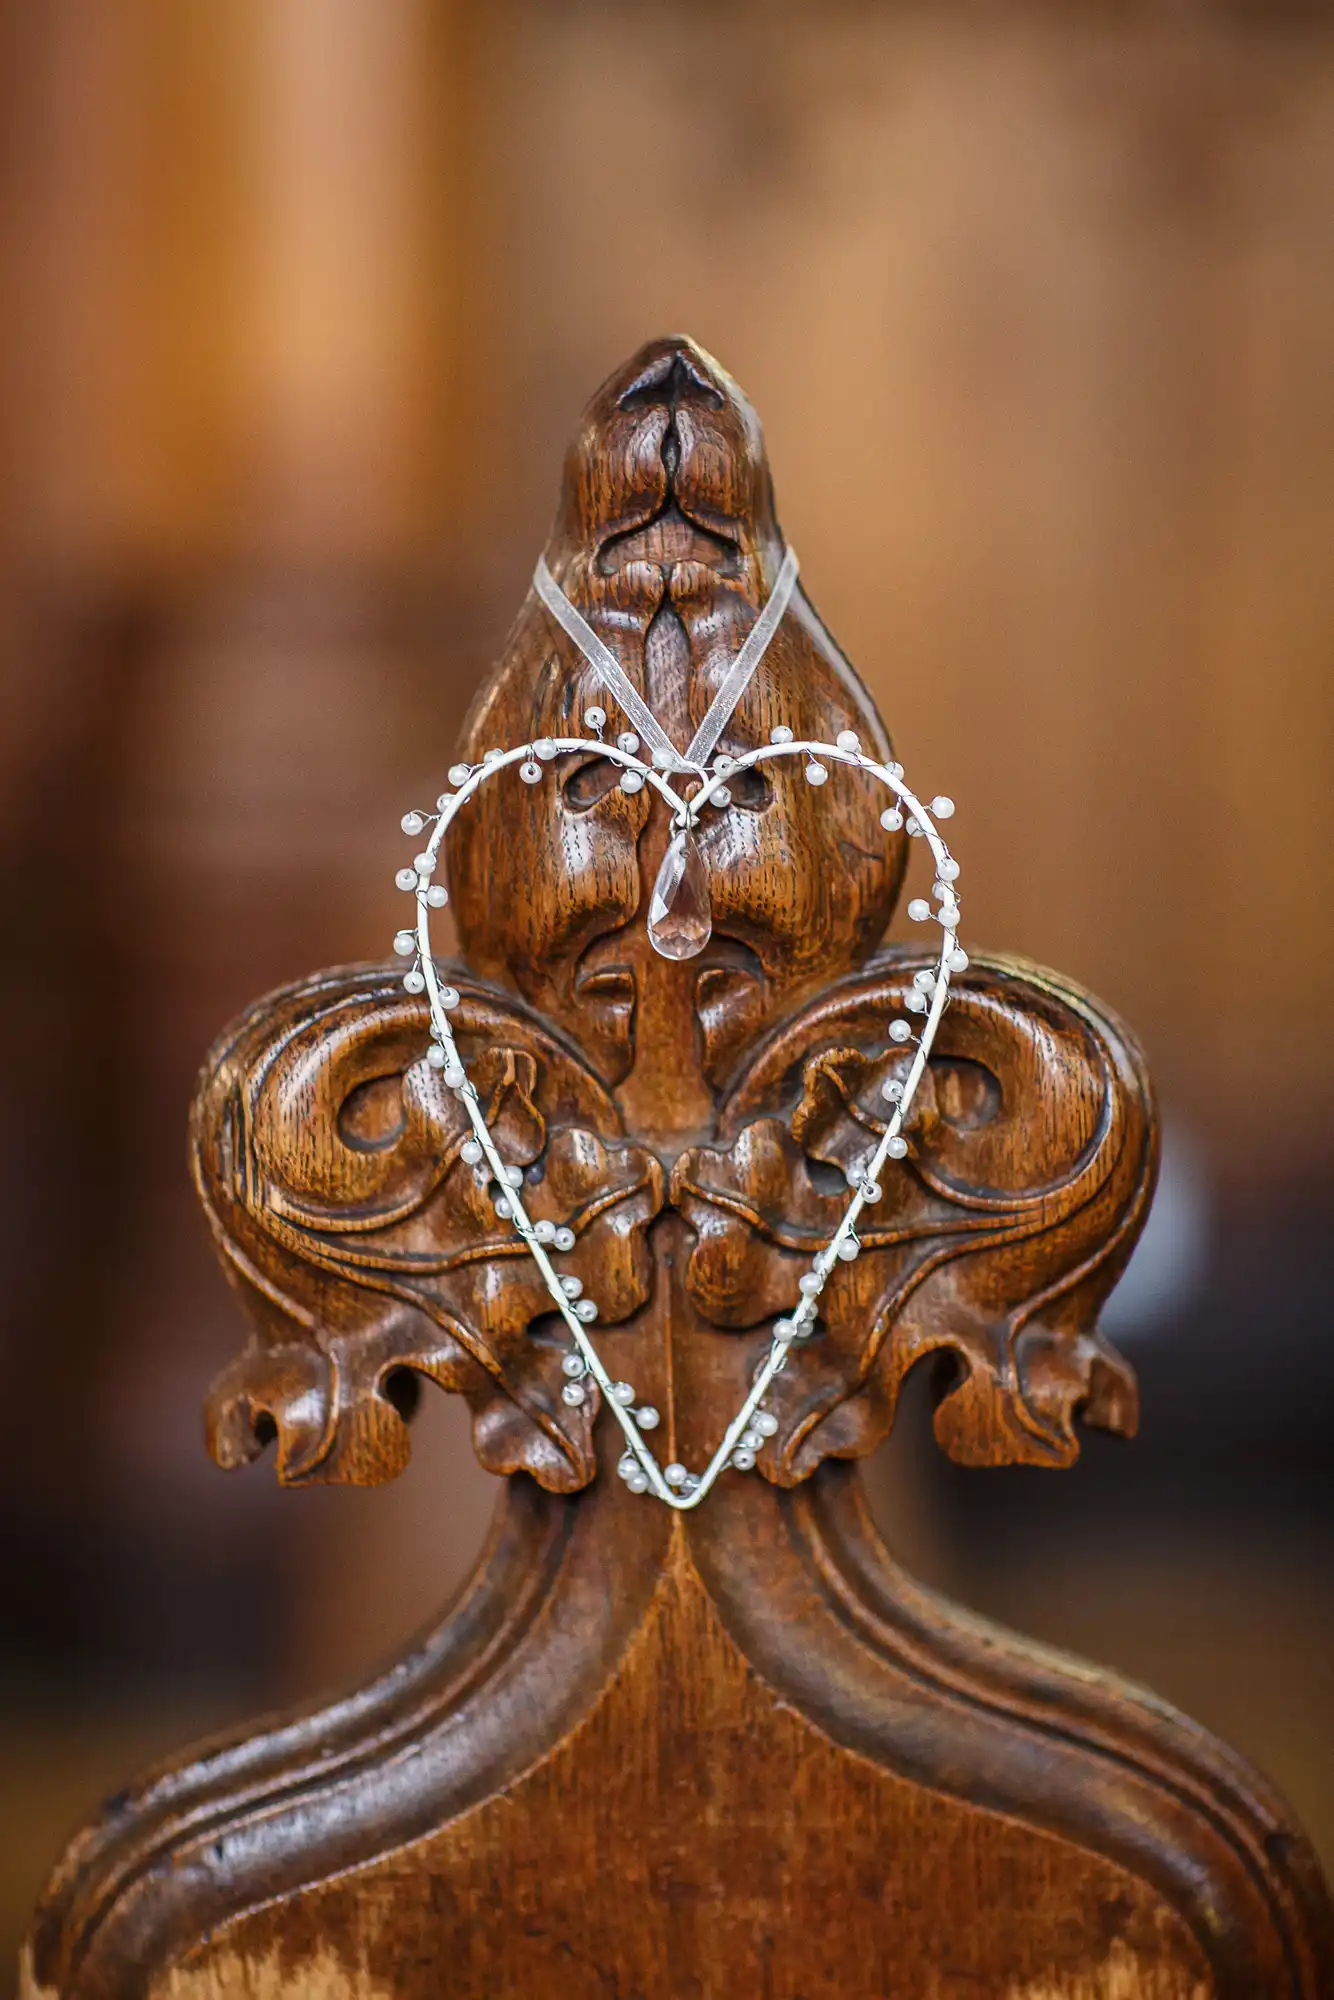 A delicate tiara rests on a carved wooden chair with an ornate backrest, set against a softly blurred background.